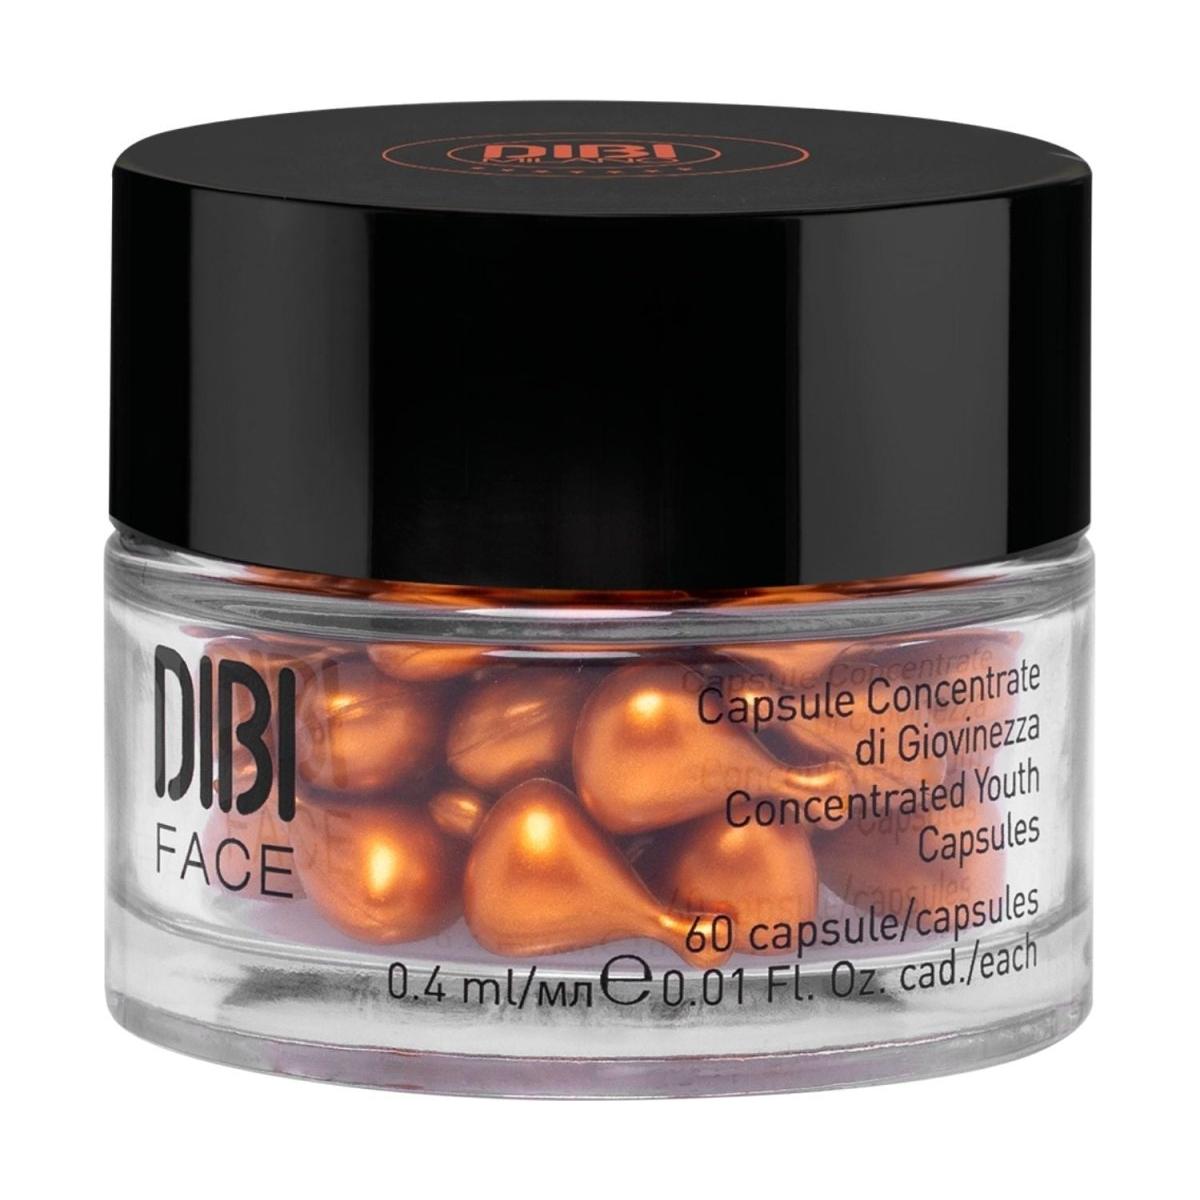 DIBI Milano | Age Method Concentrated Youth Capsules | 60 caps - DG International Ventures Limited